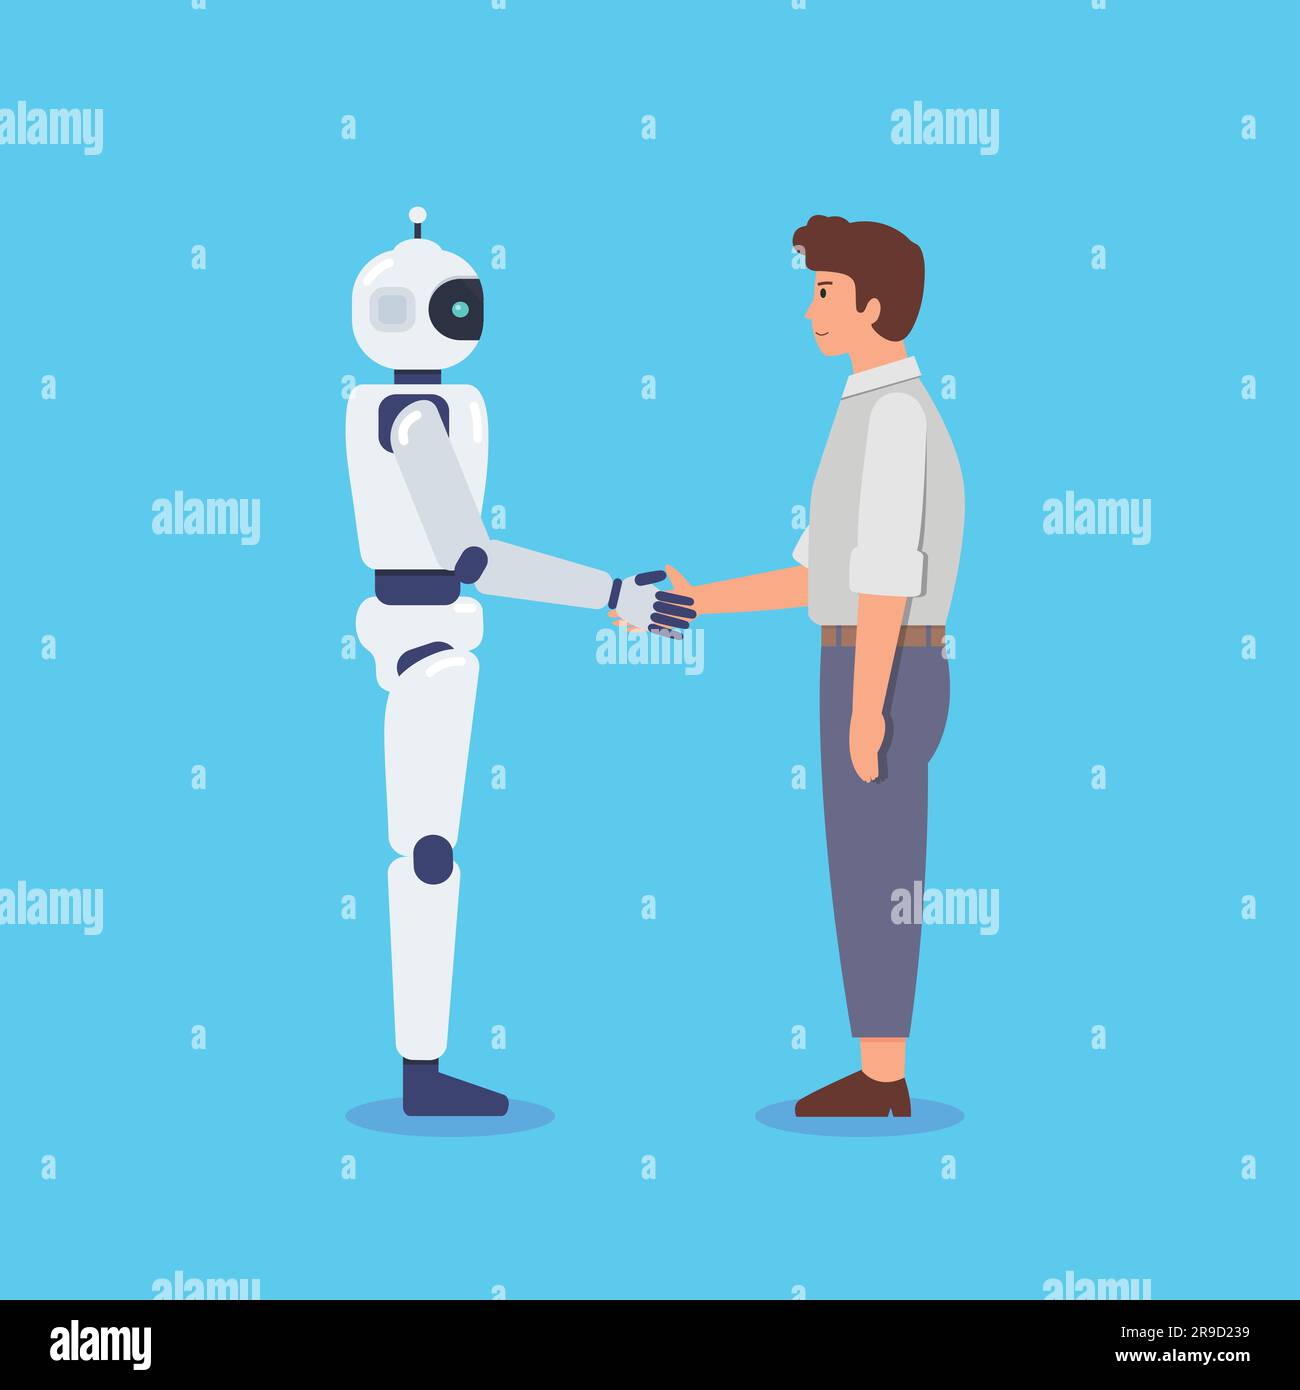 Handshake between man and robot. Human and AI Artificial Intelligence working together. Vector illustration Stock Vector